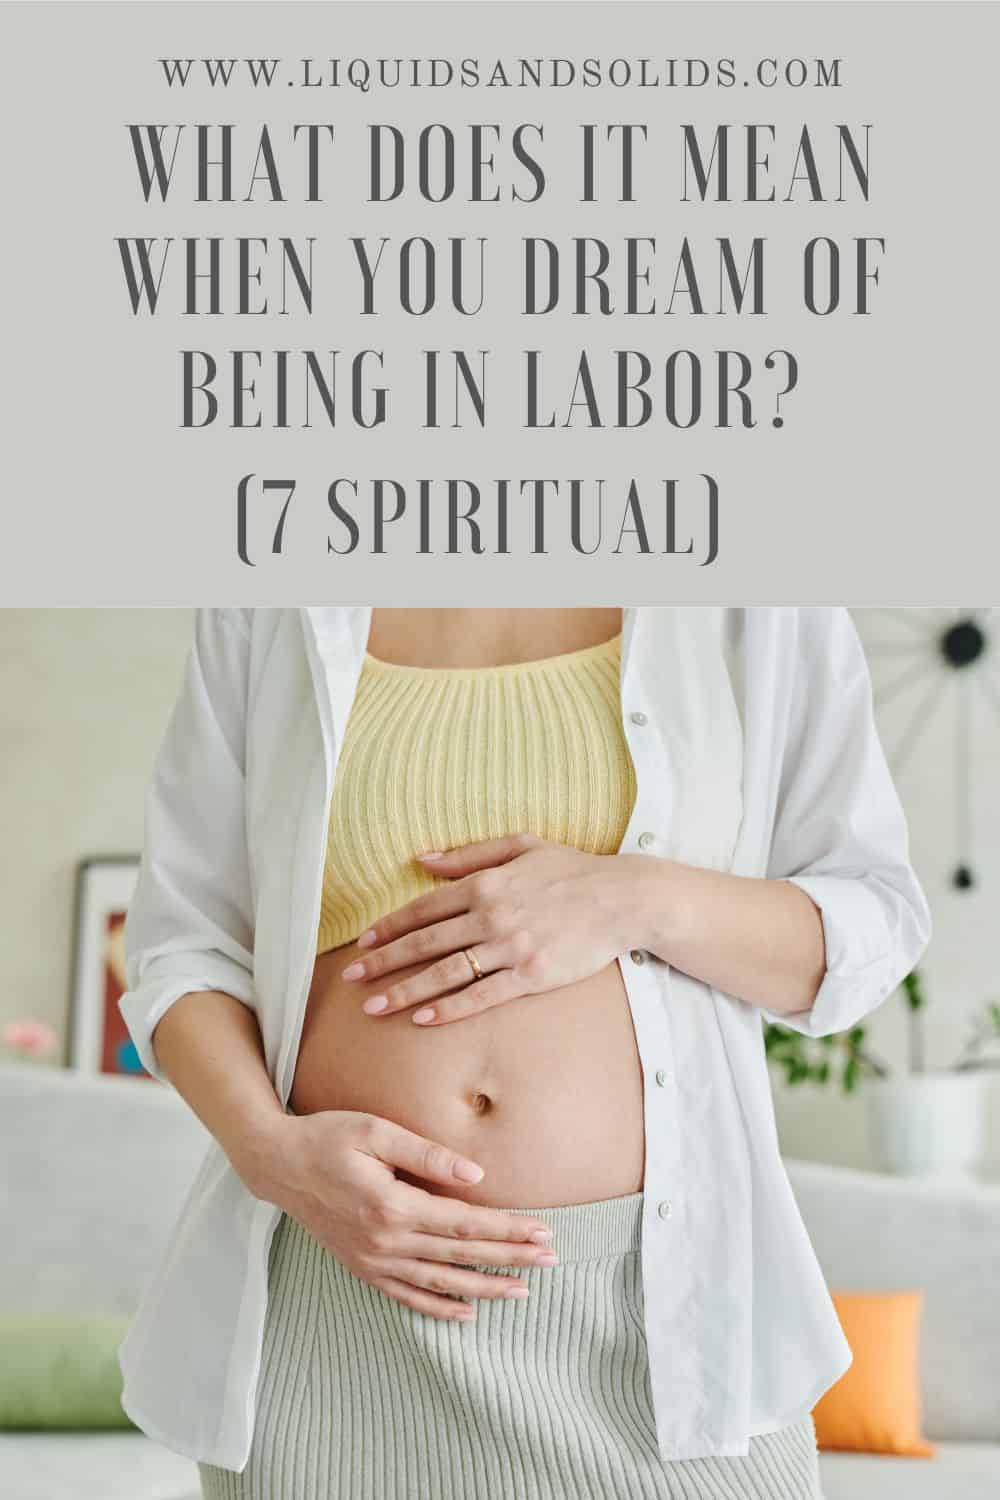 What Does It Mean When You Dream Of Being In Labor (7 Spiritual)